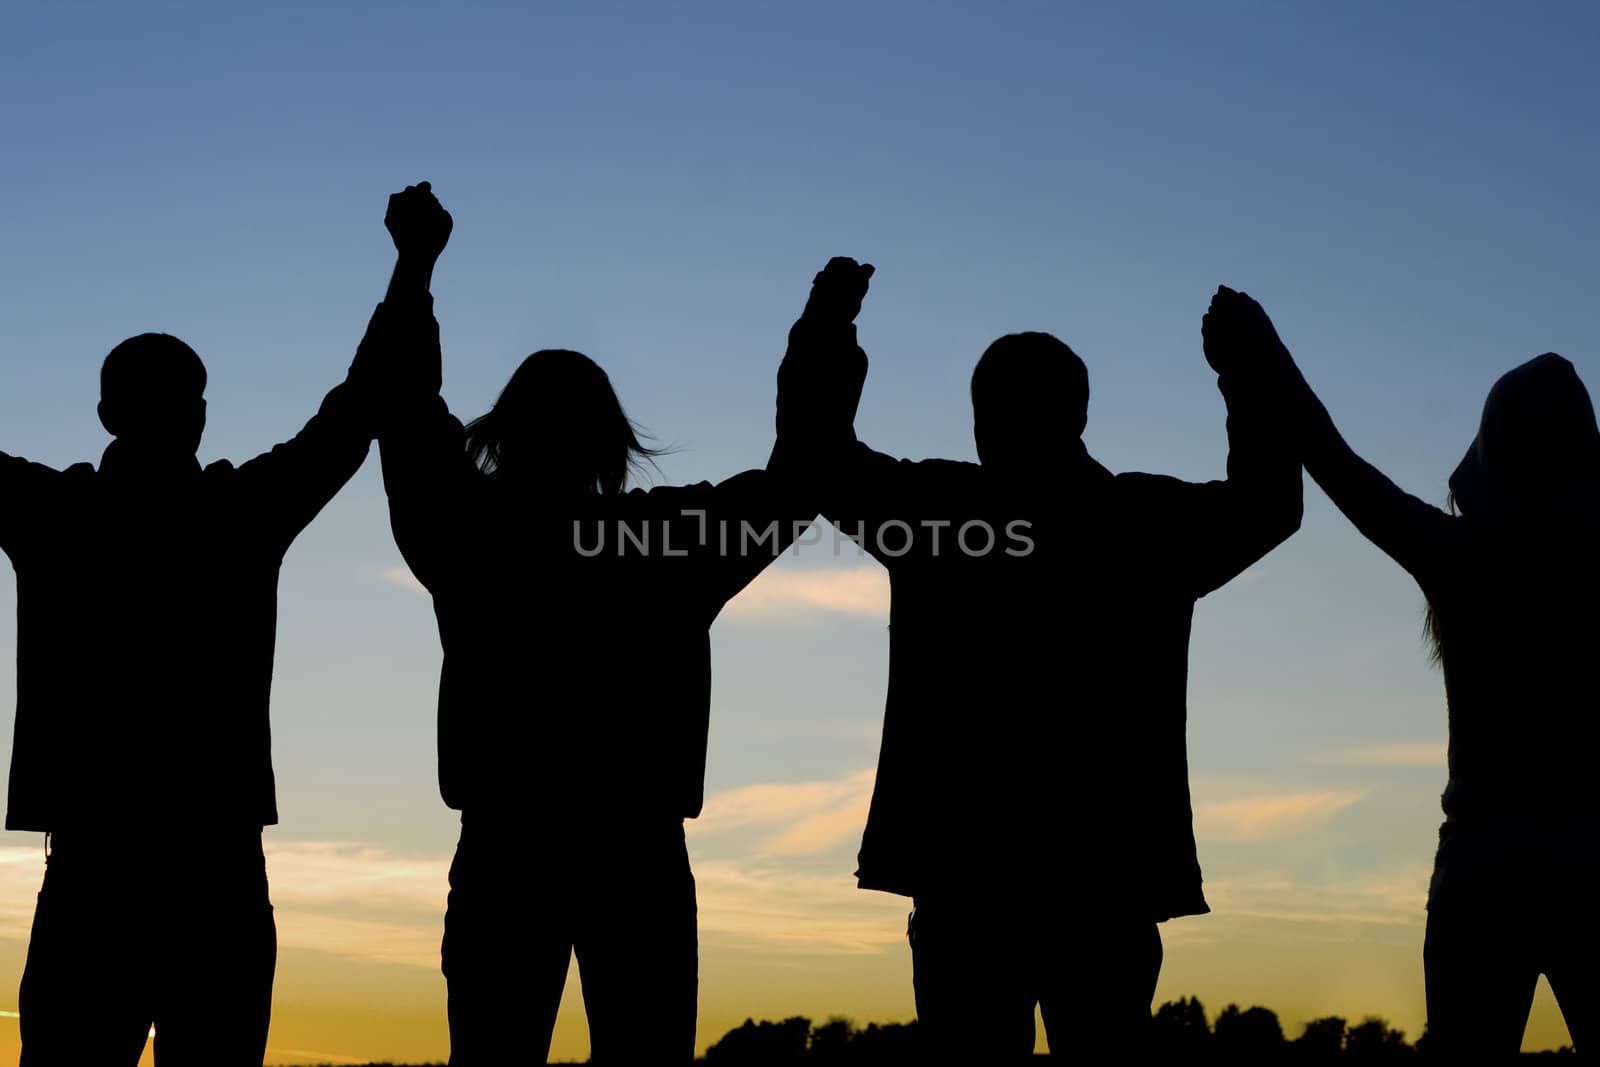 A group of people raise their arms together in cheering.